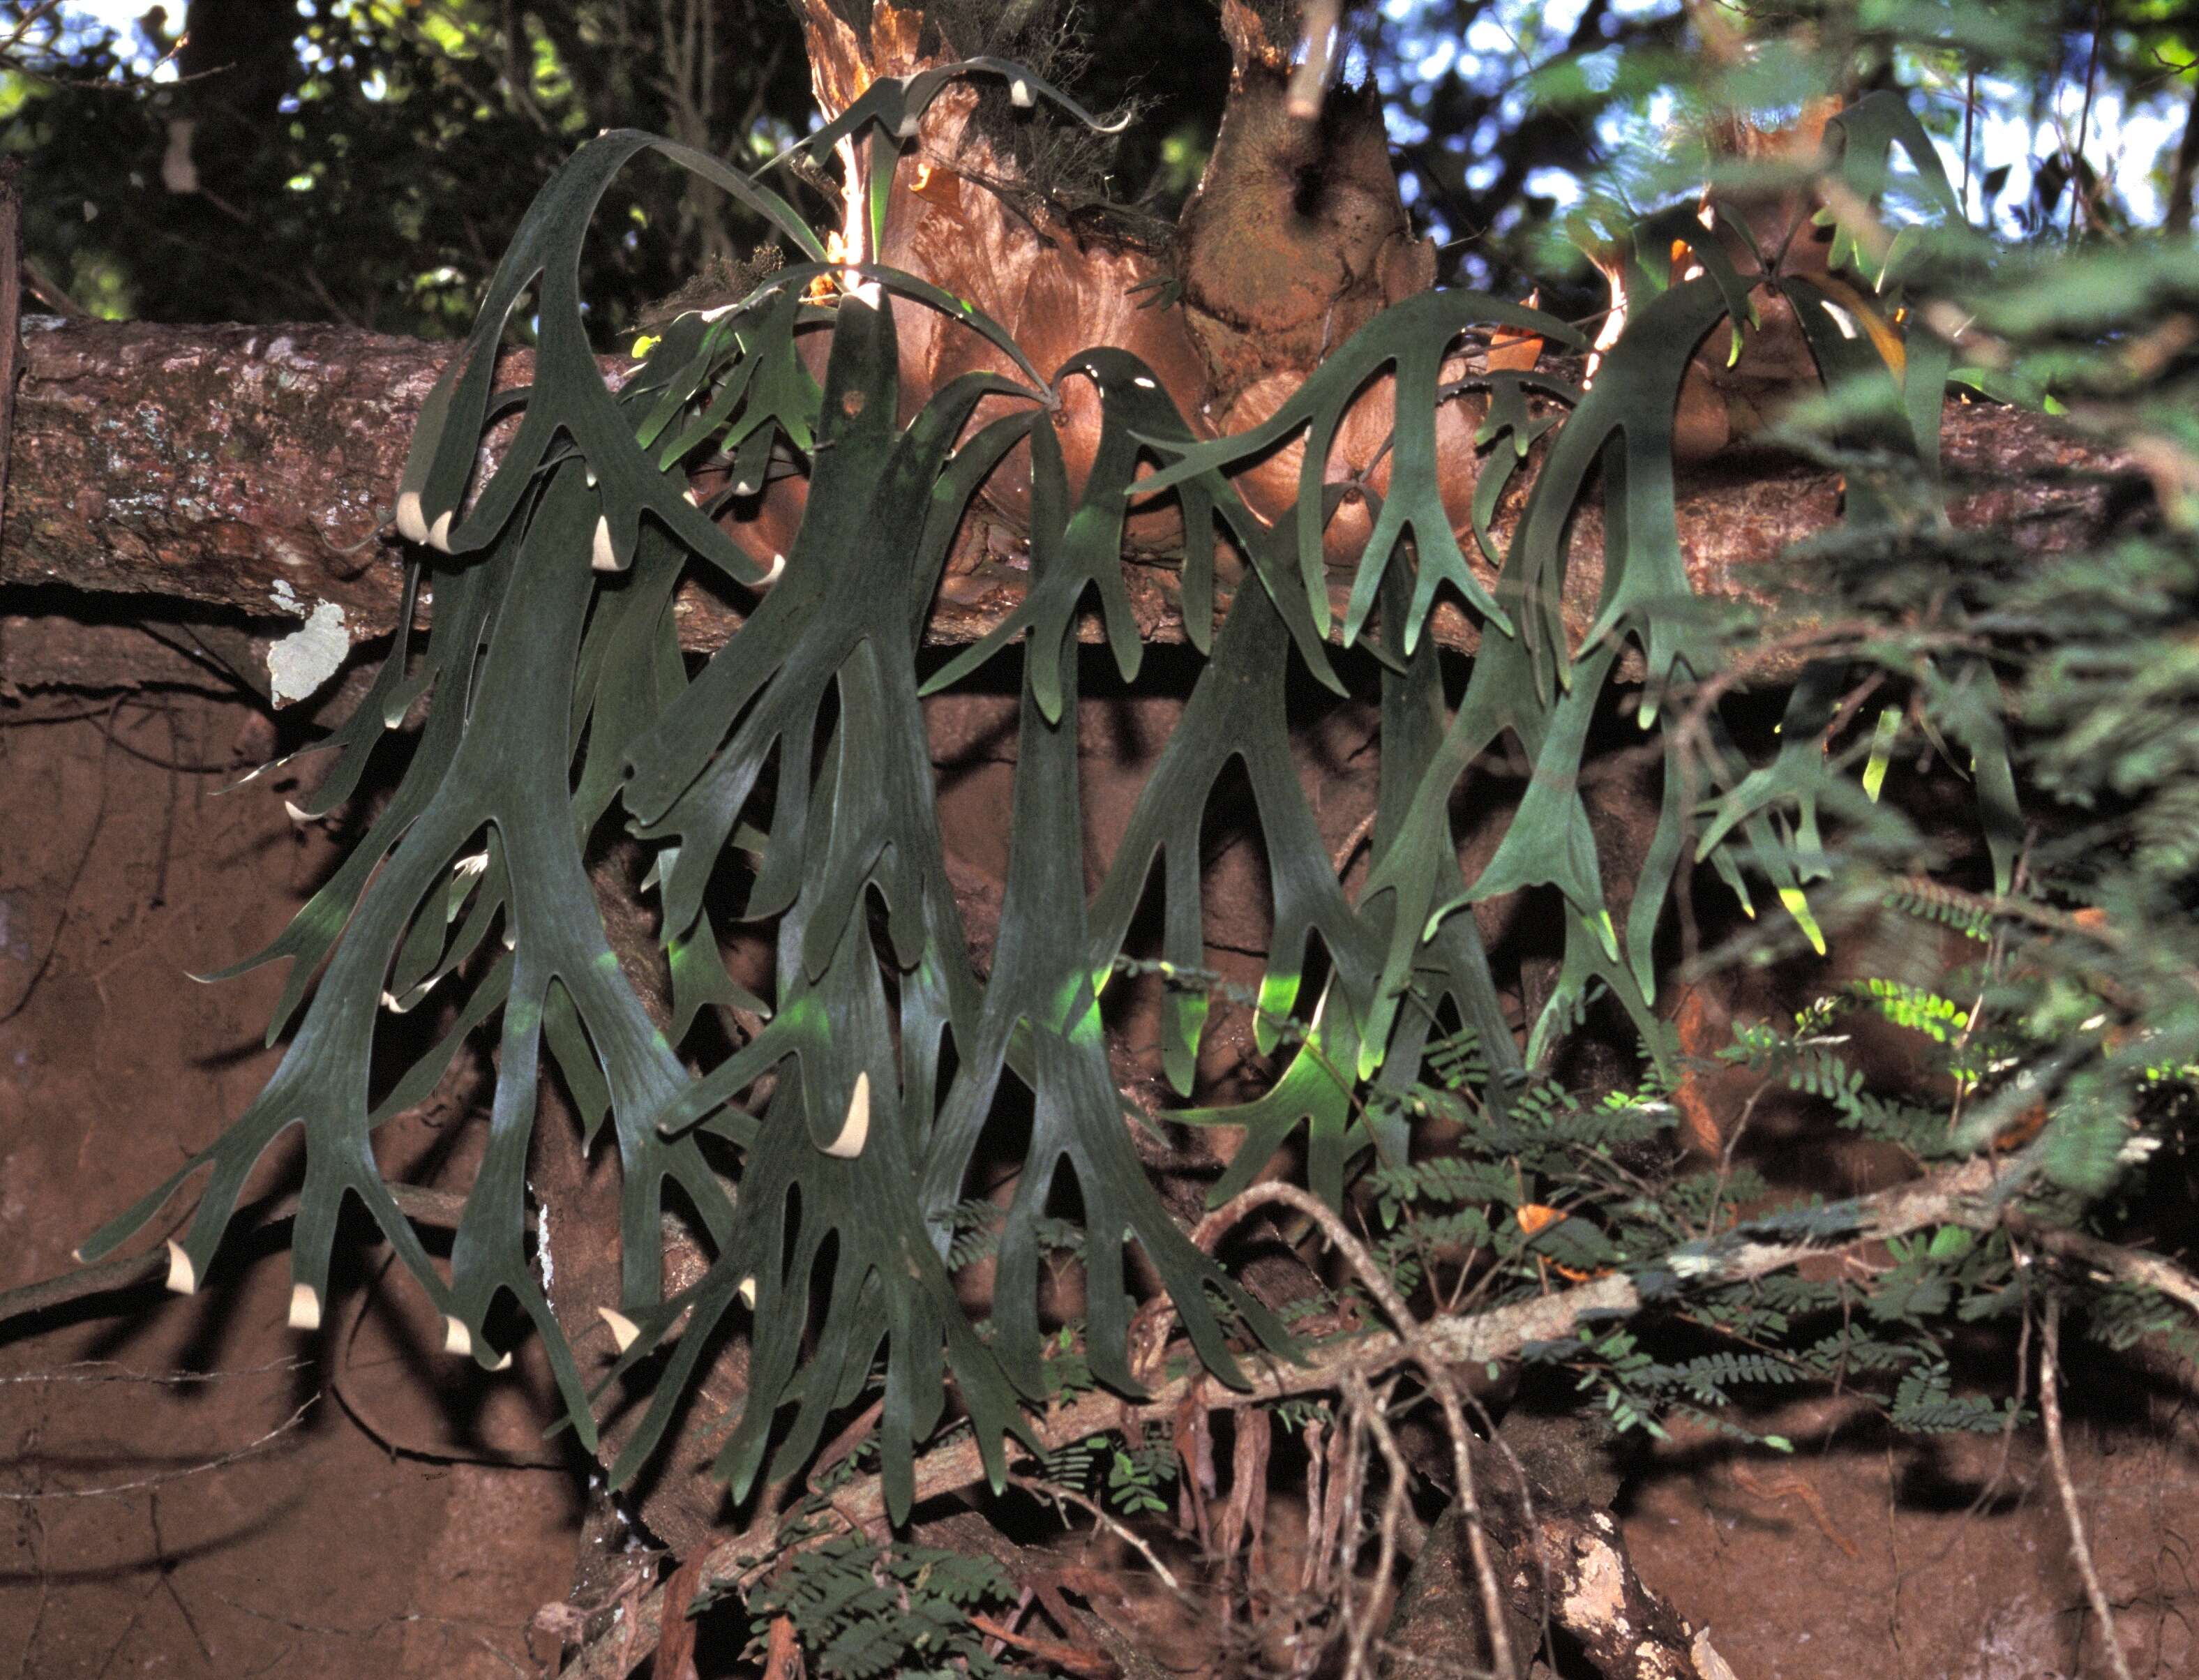 Image of staghorn